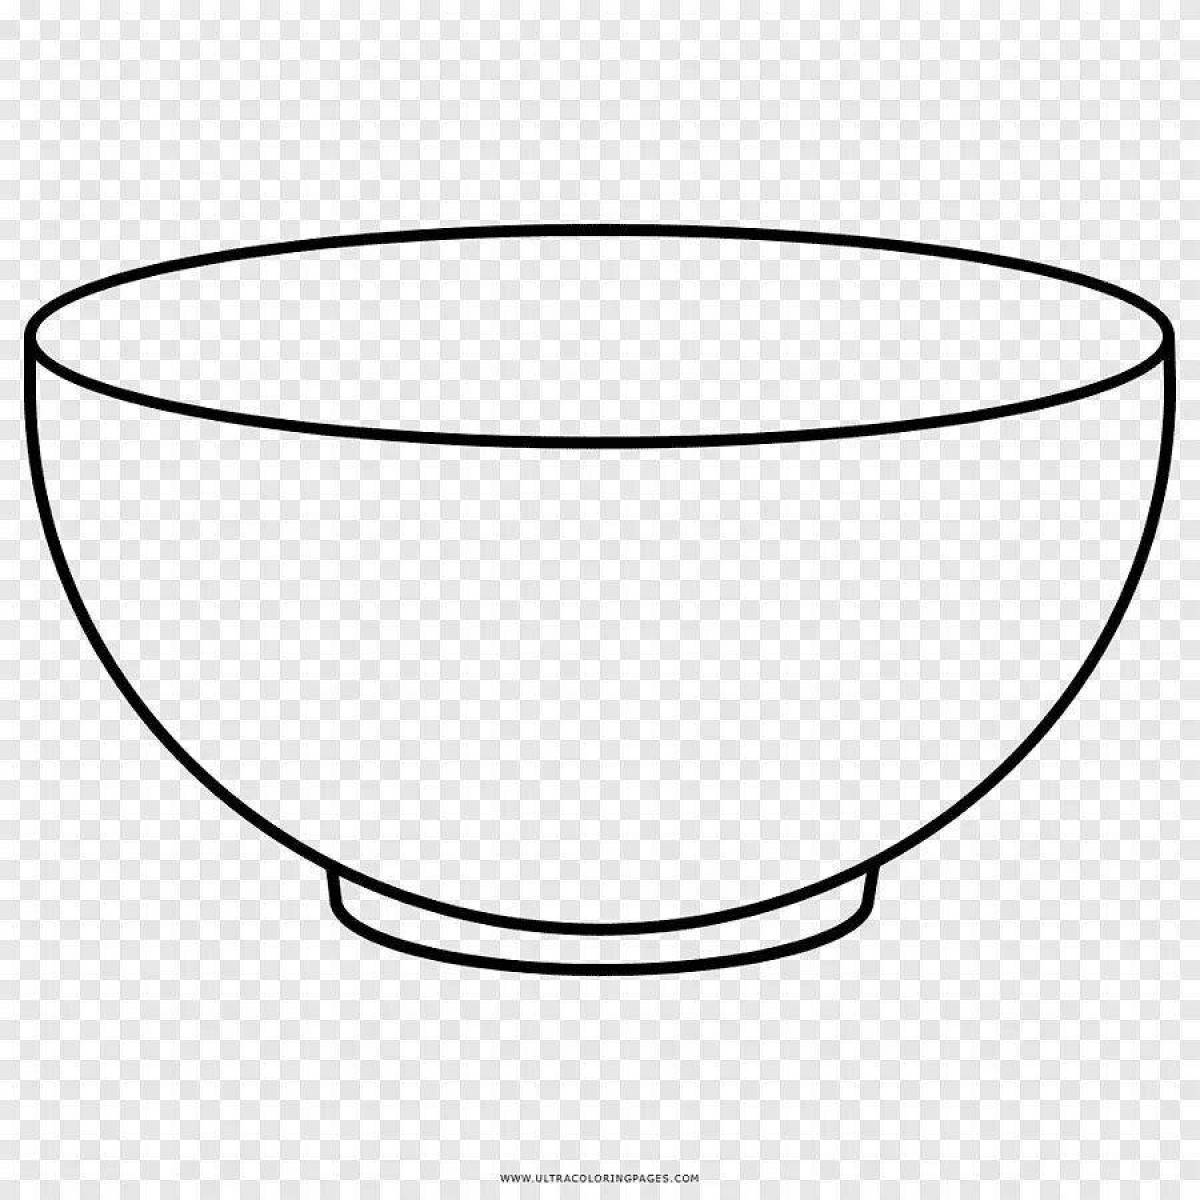 Coloring bowl for children